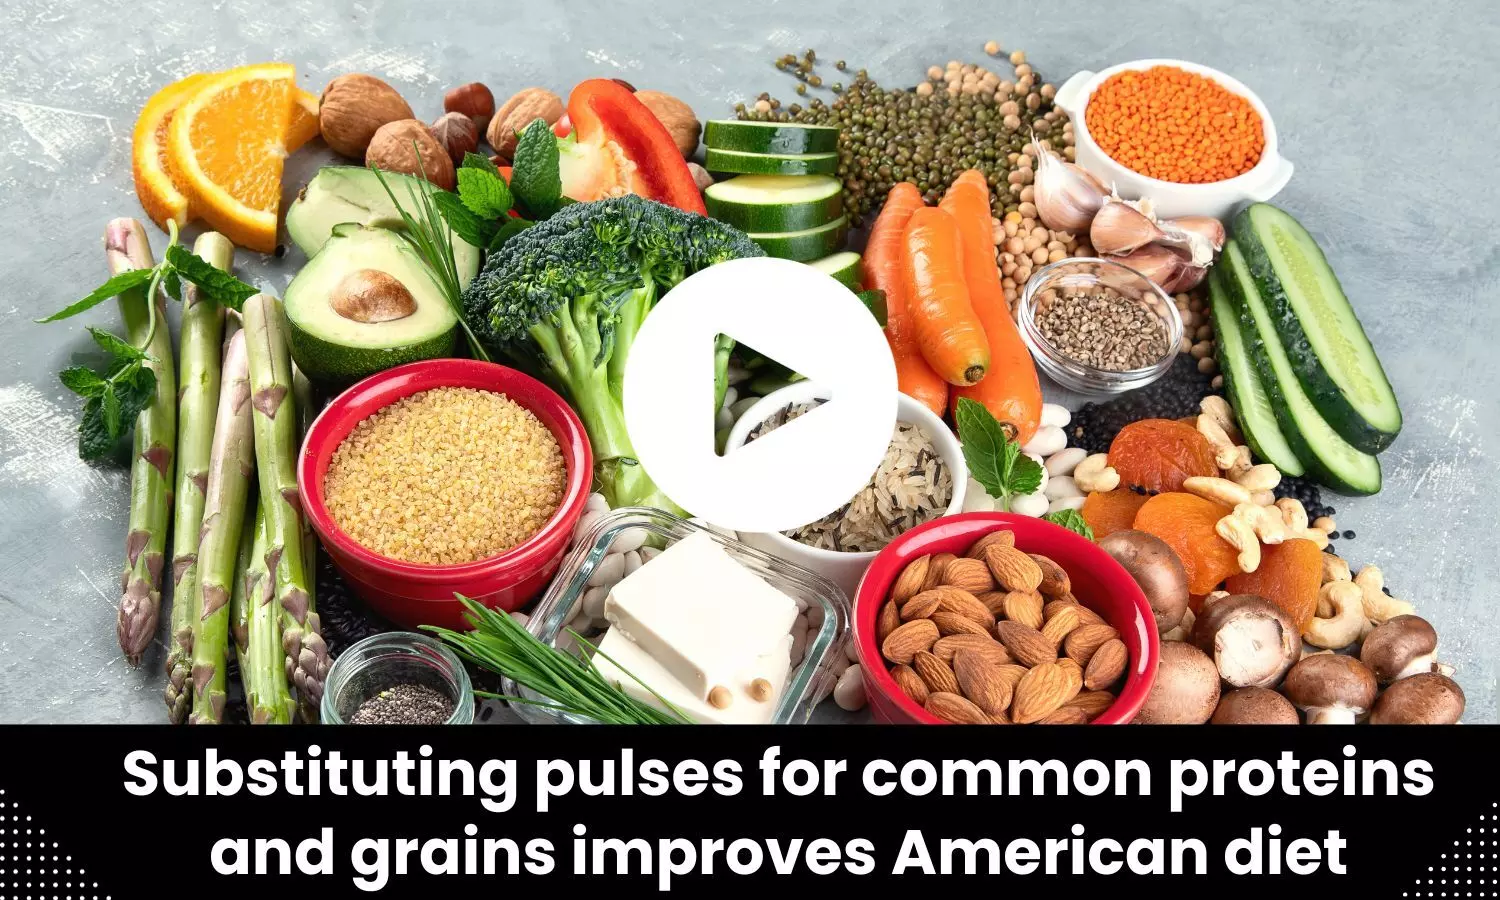 Substituting pulses for common proteins and grains improves American diet